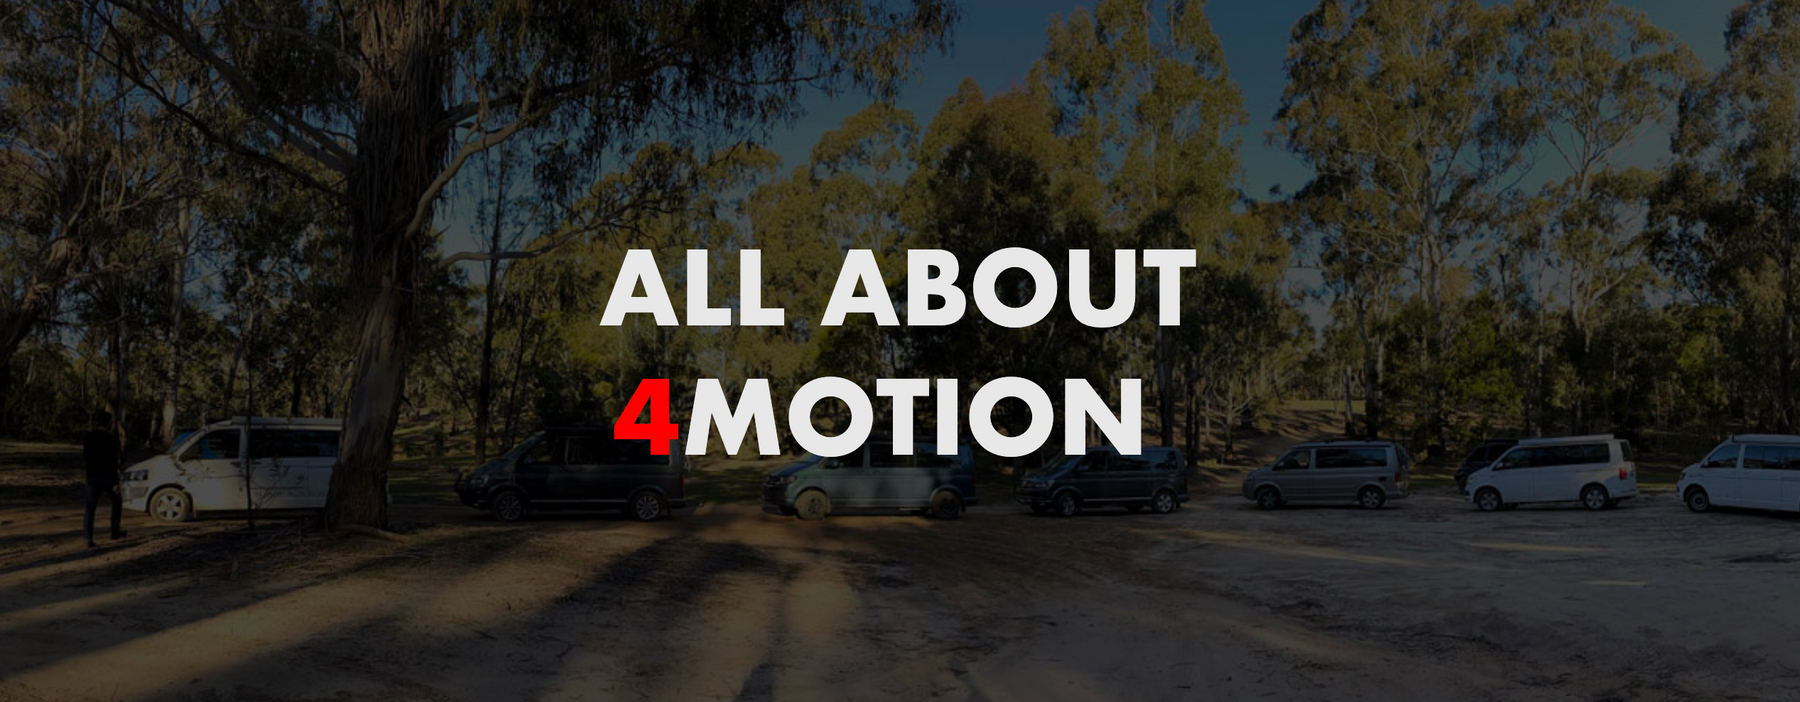 ALL ABOUT 4MOTION